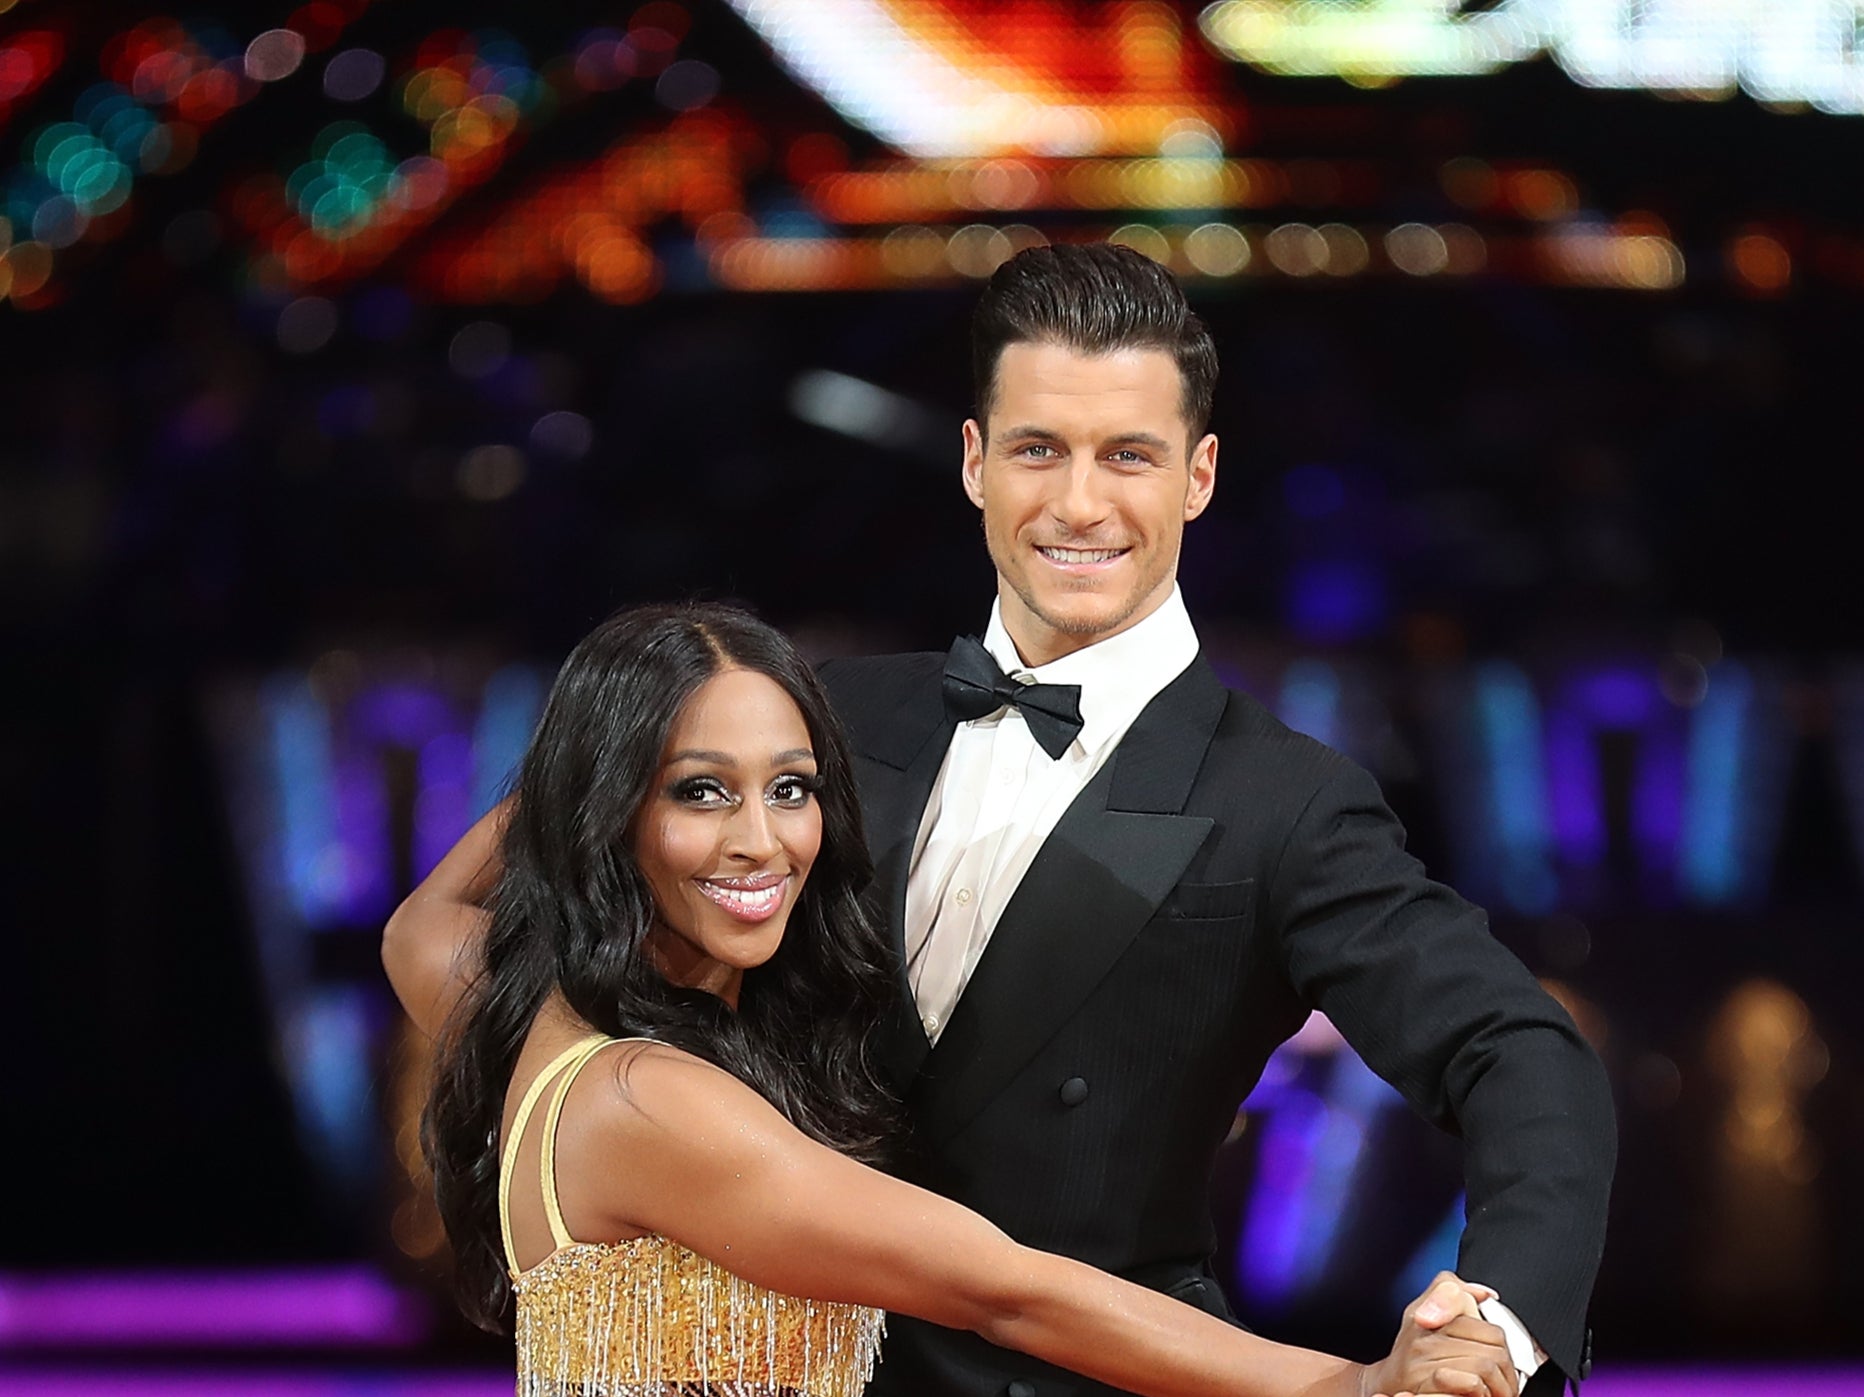 Alexandra Burke was told to ‘smile more’ during her appearance on ‘Strictly’ in 2017